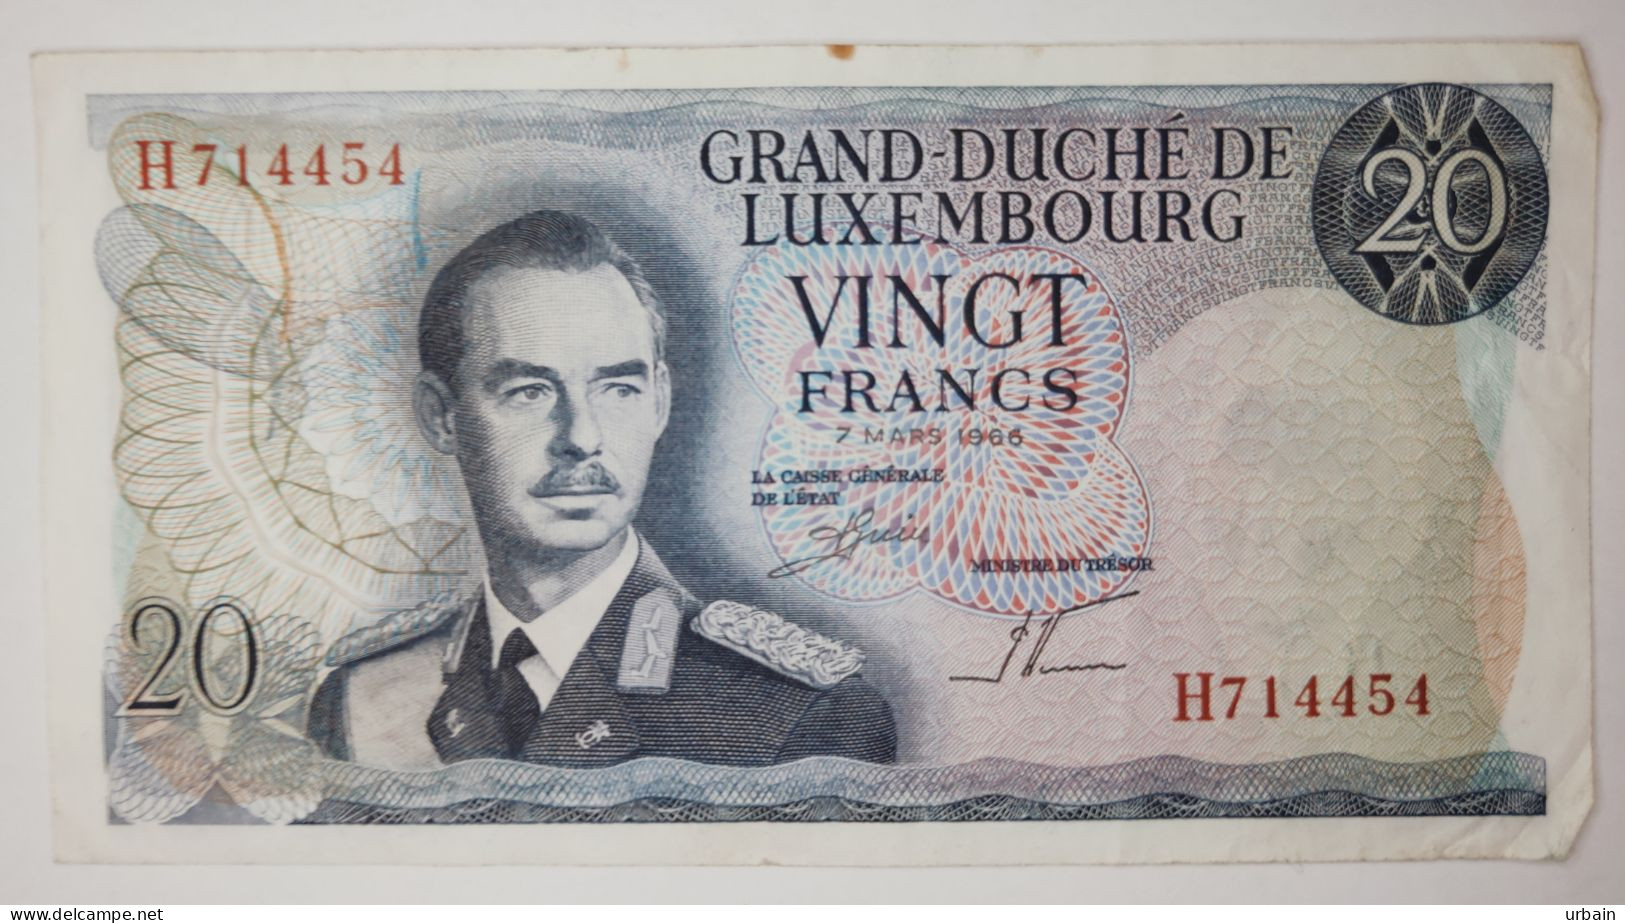 Batch Of 5 Banknotes - Luxembourg - 20 Francs - 7 Mars 1966 - Lussemburgo